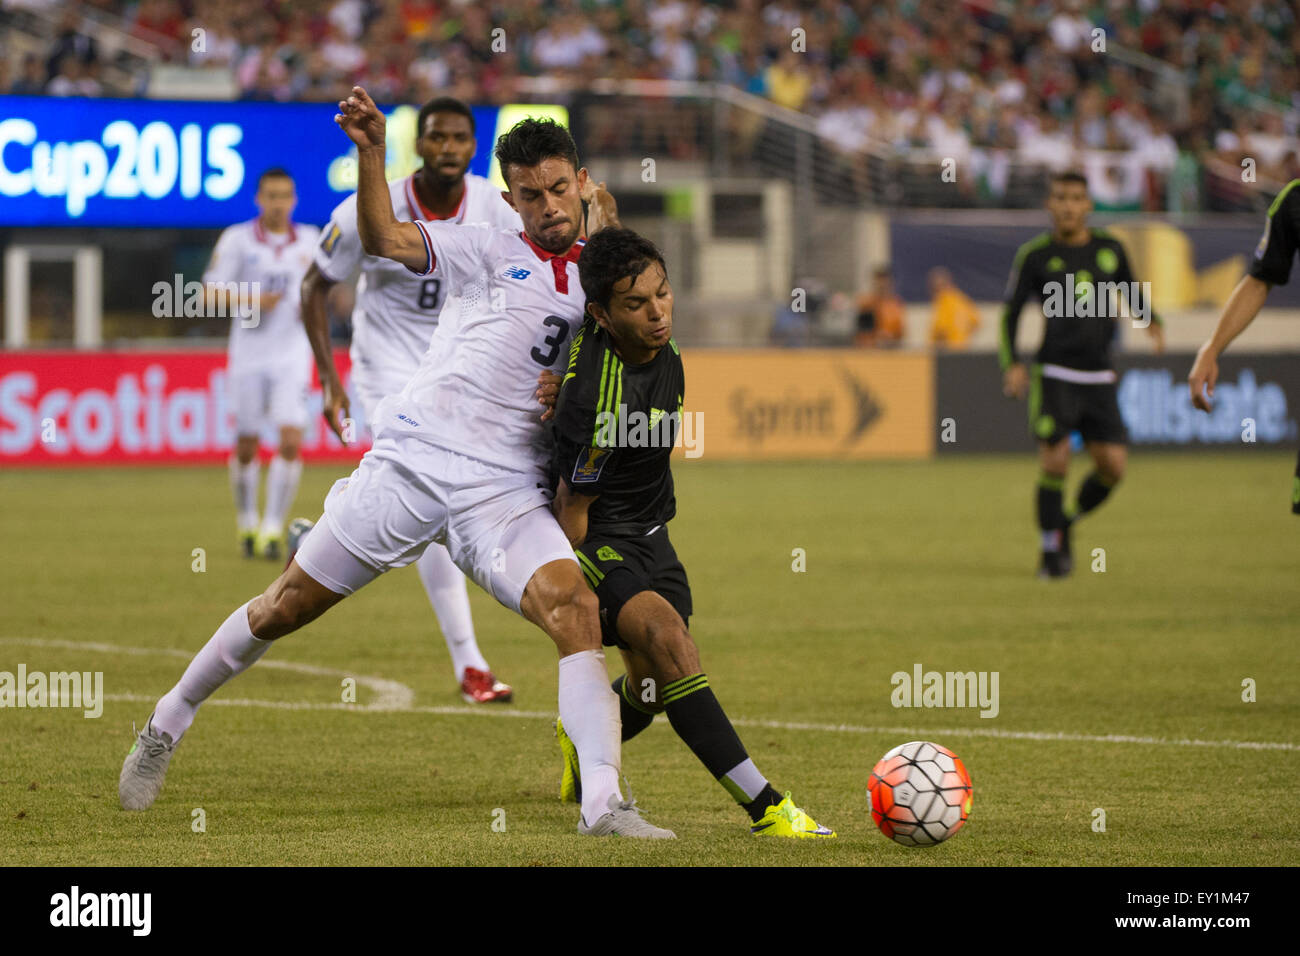 Met Life Stadium, East Rutherford, NJ, USA. 19th July, 2015. Mexico forward Oribe Peralta (19) is pushed by Costa Rica defender Giancarlo Gonzalez (3) during the quarter-finals of The CONCACAF Gold Cup match between Mexico and Costa Rica at Met Life Stadium, East Rutherford, NJ. Mexico defeated Costa Rica 1-0 in the final minute of extra time. Mandatory Credit: Kostas Lymperopoulos/CSM/Alamy Live News Stock Photo